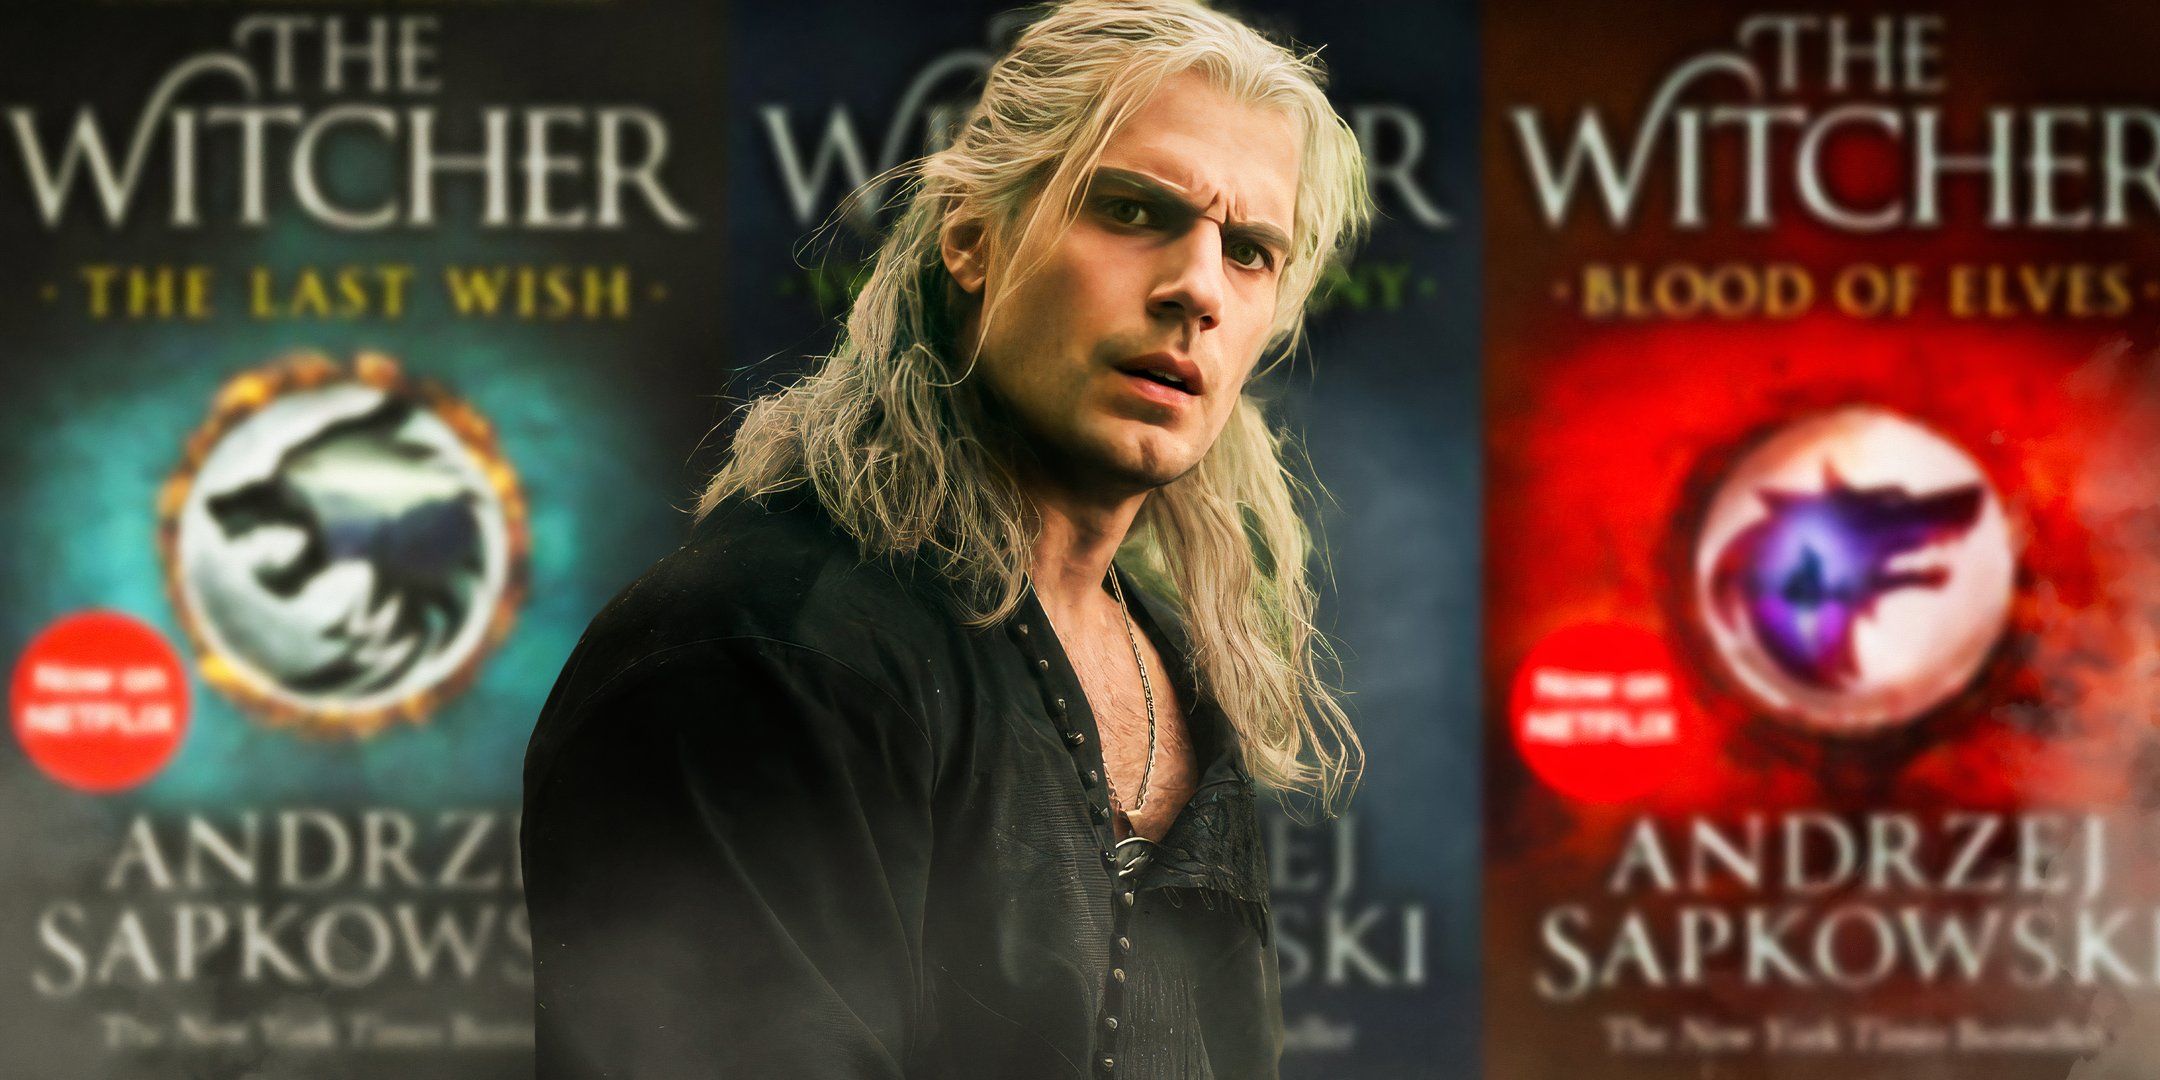 Henry Cavill as Geralt from The Witcher and images of The Witcher book covers